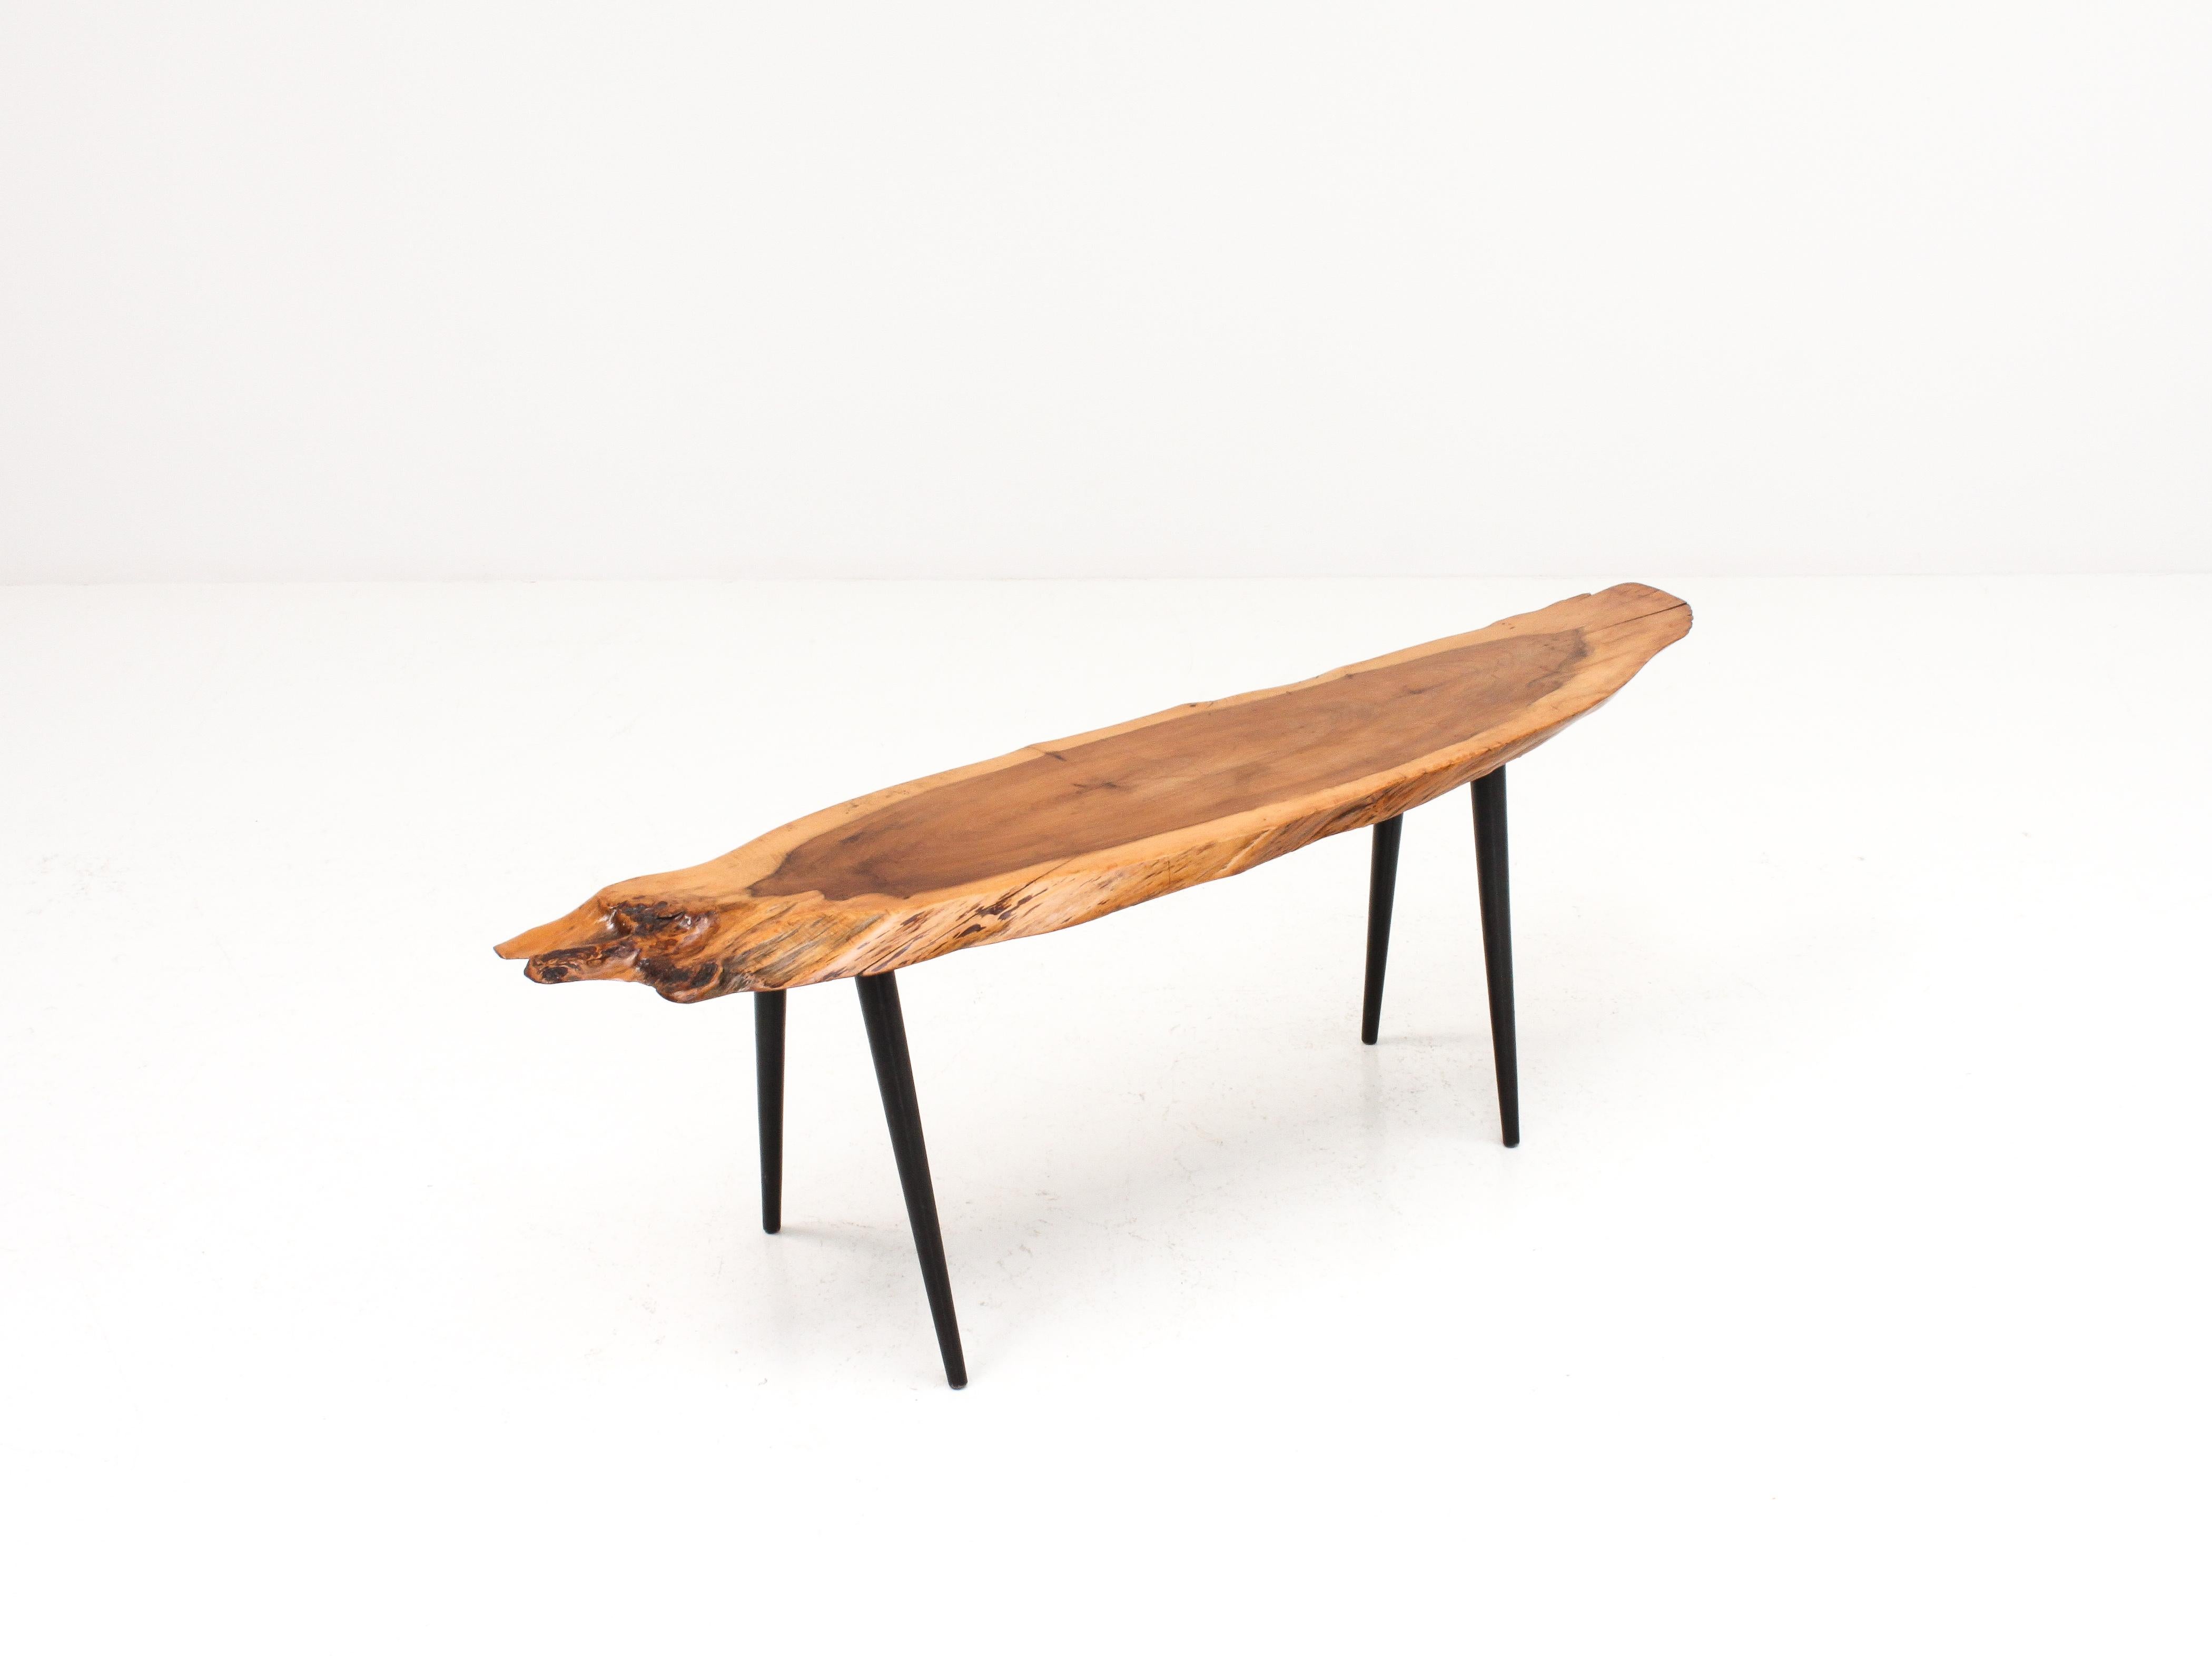 A 1960s live edge coffee table with a solid yew wood top with its attractive organic aesthetic sitting on oblique tapered legs. 

The condition overall is good, with minor signs of wear in line with being a vintage piece.

We offer fast,